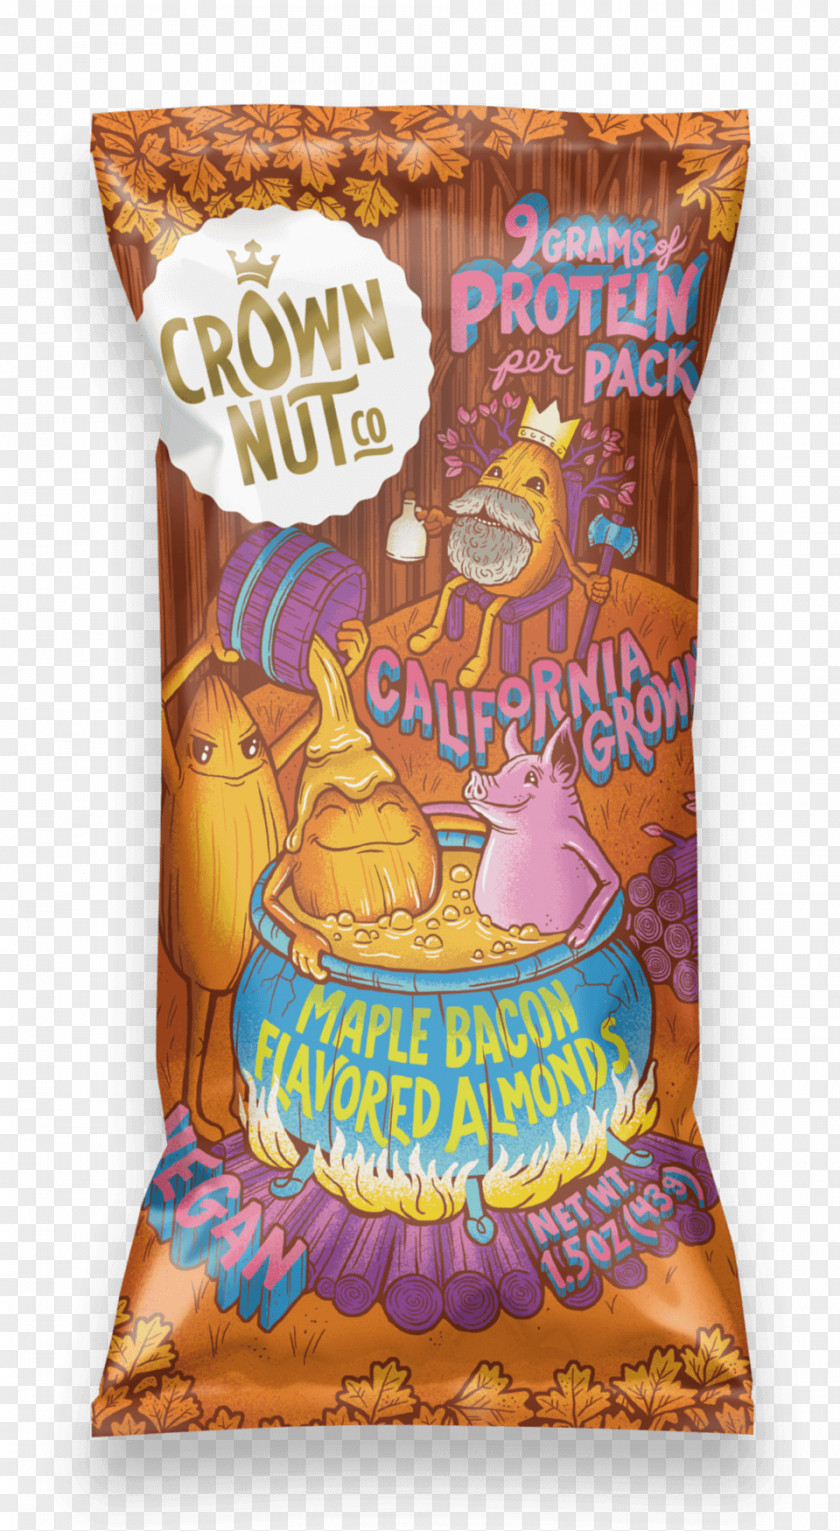 Nuts Package Crown Nut Co Potato Chip Almond Flavor PNG